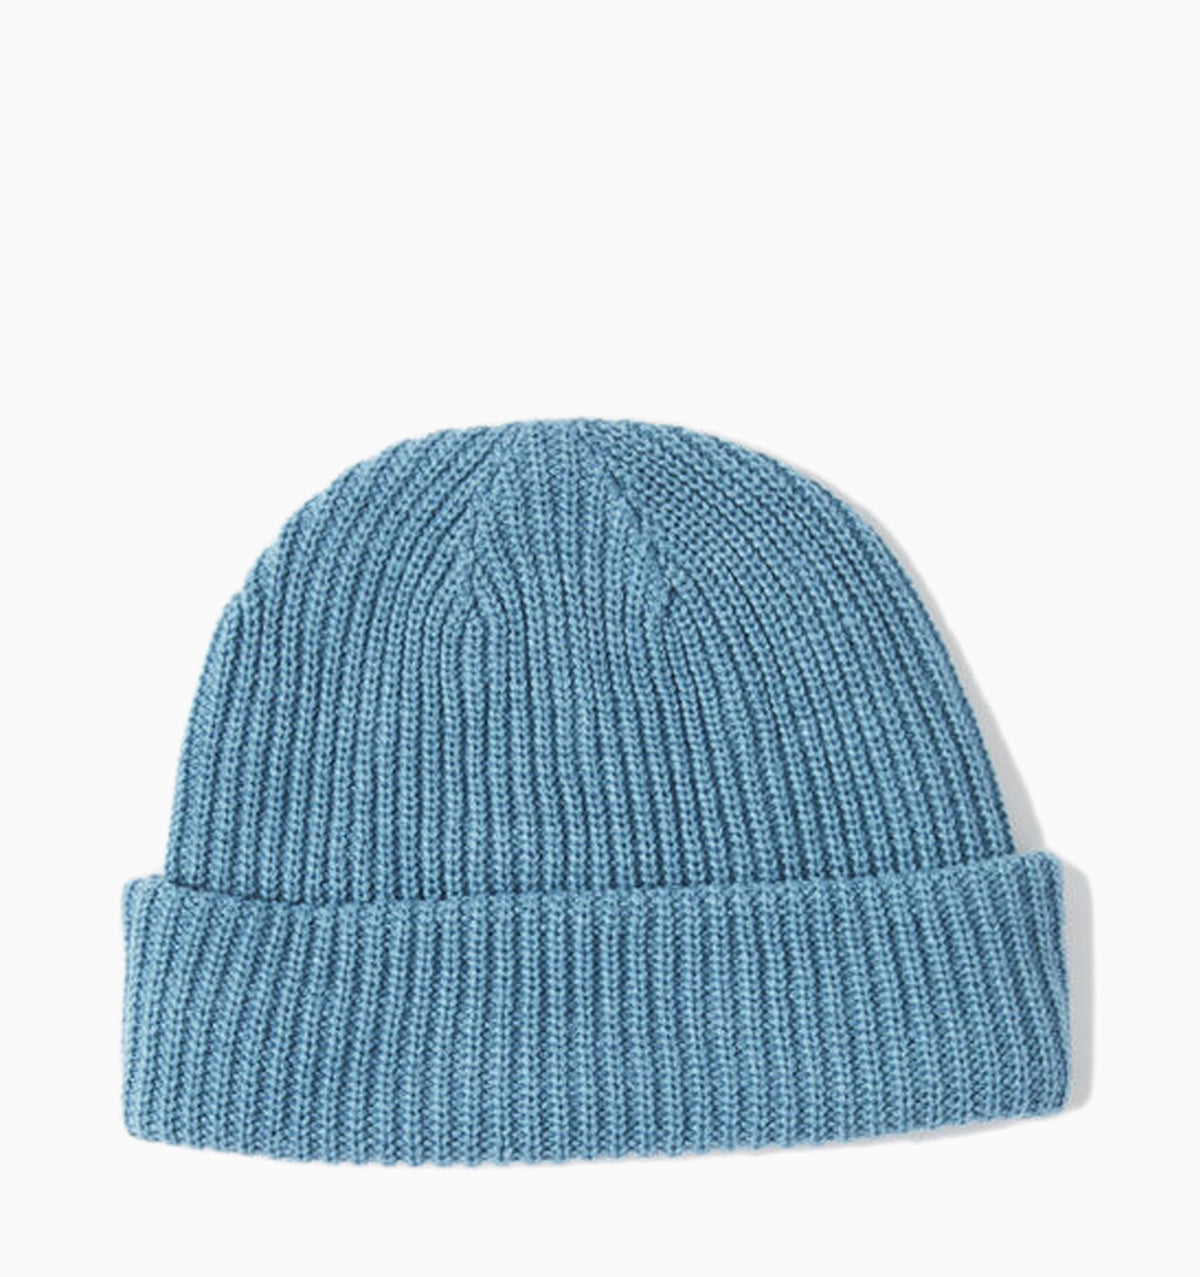 The North Face Salty Dog Beanie - Storm Blue Heather